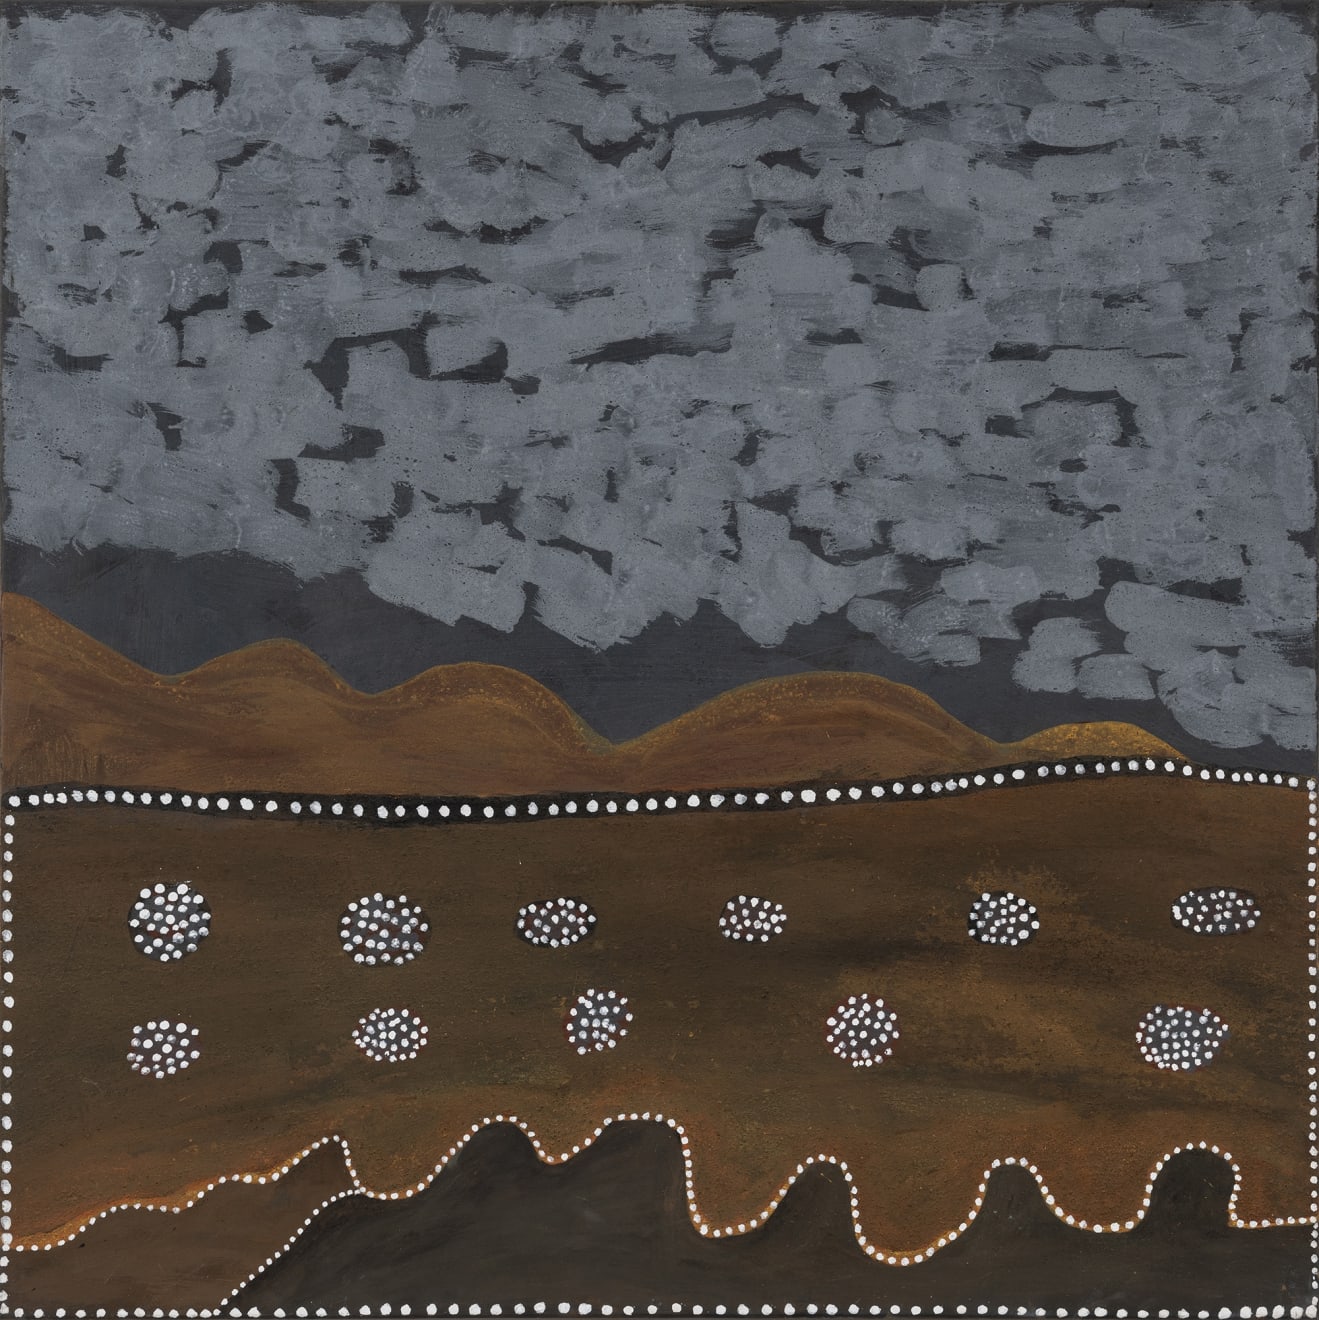 Mr R Peters, Yariny Daam (Moon Dreaming Country), 2015